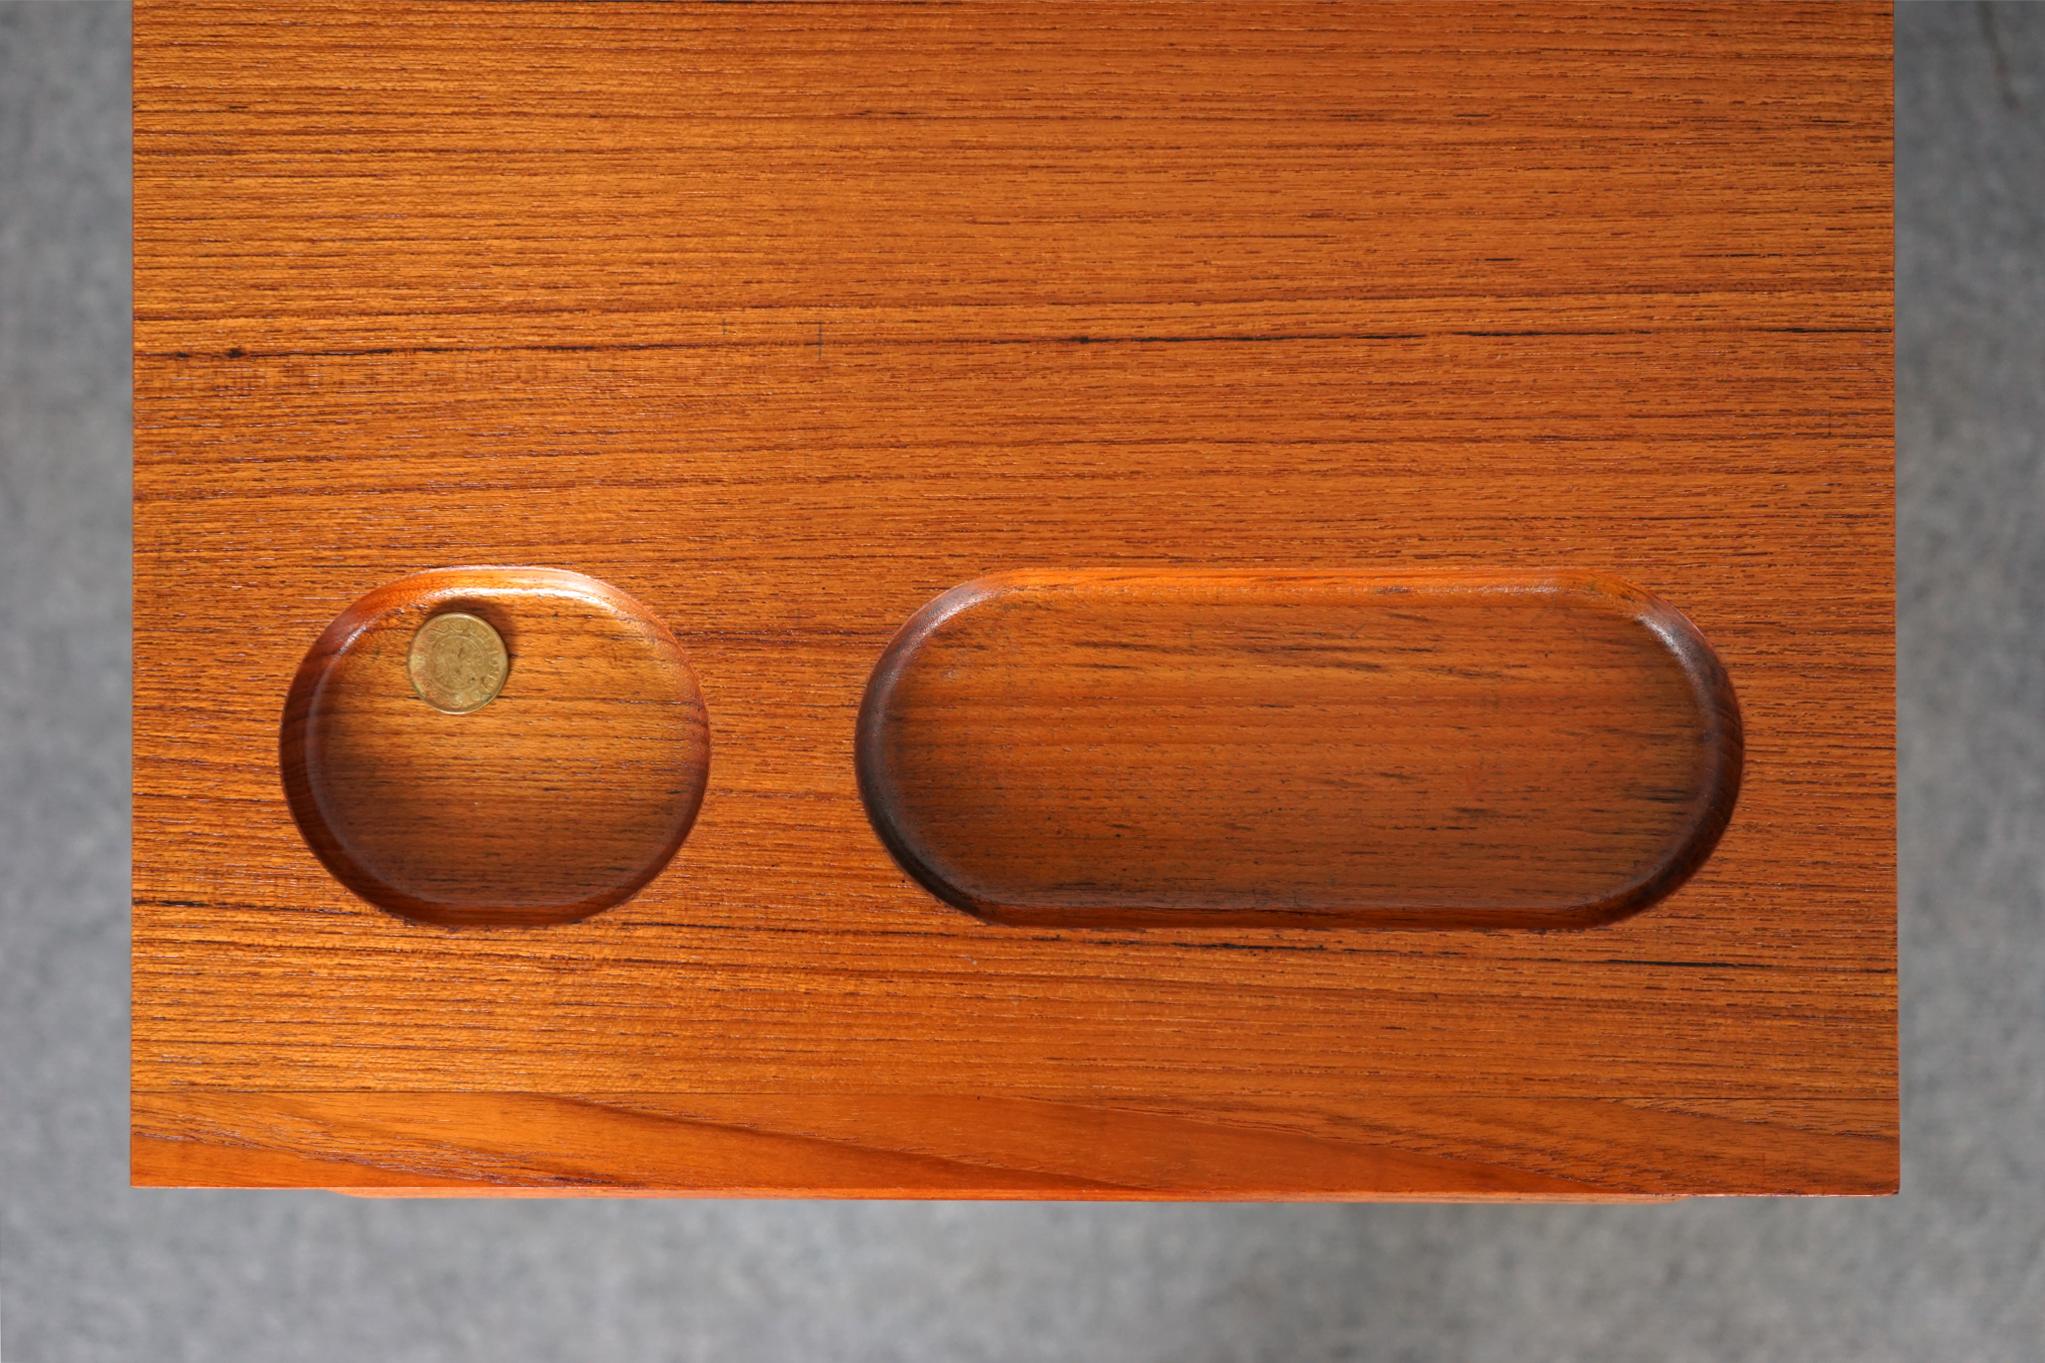 Danish Mid-Century Modern Teak Desk, by Ib Kofod Larsen For Faarup In Good Condition For Sale In VANCOUVER, CA